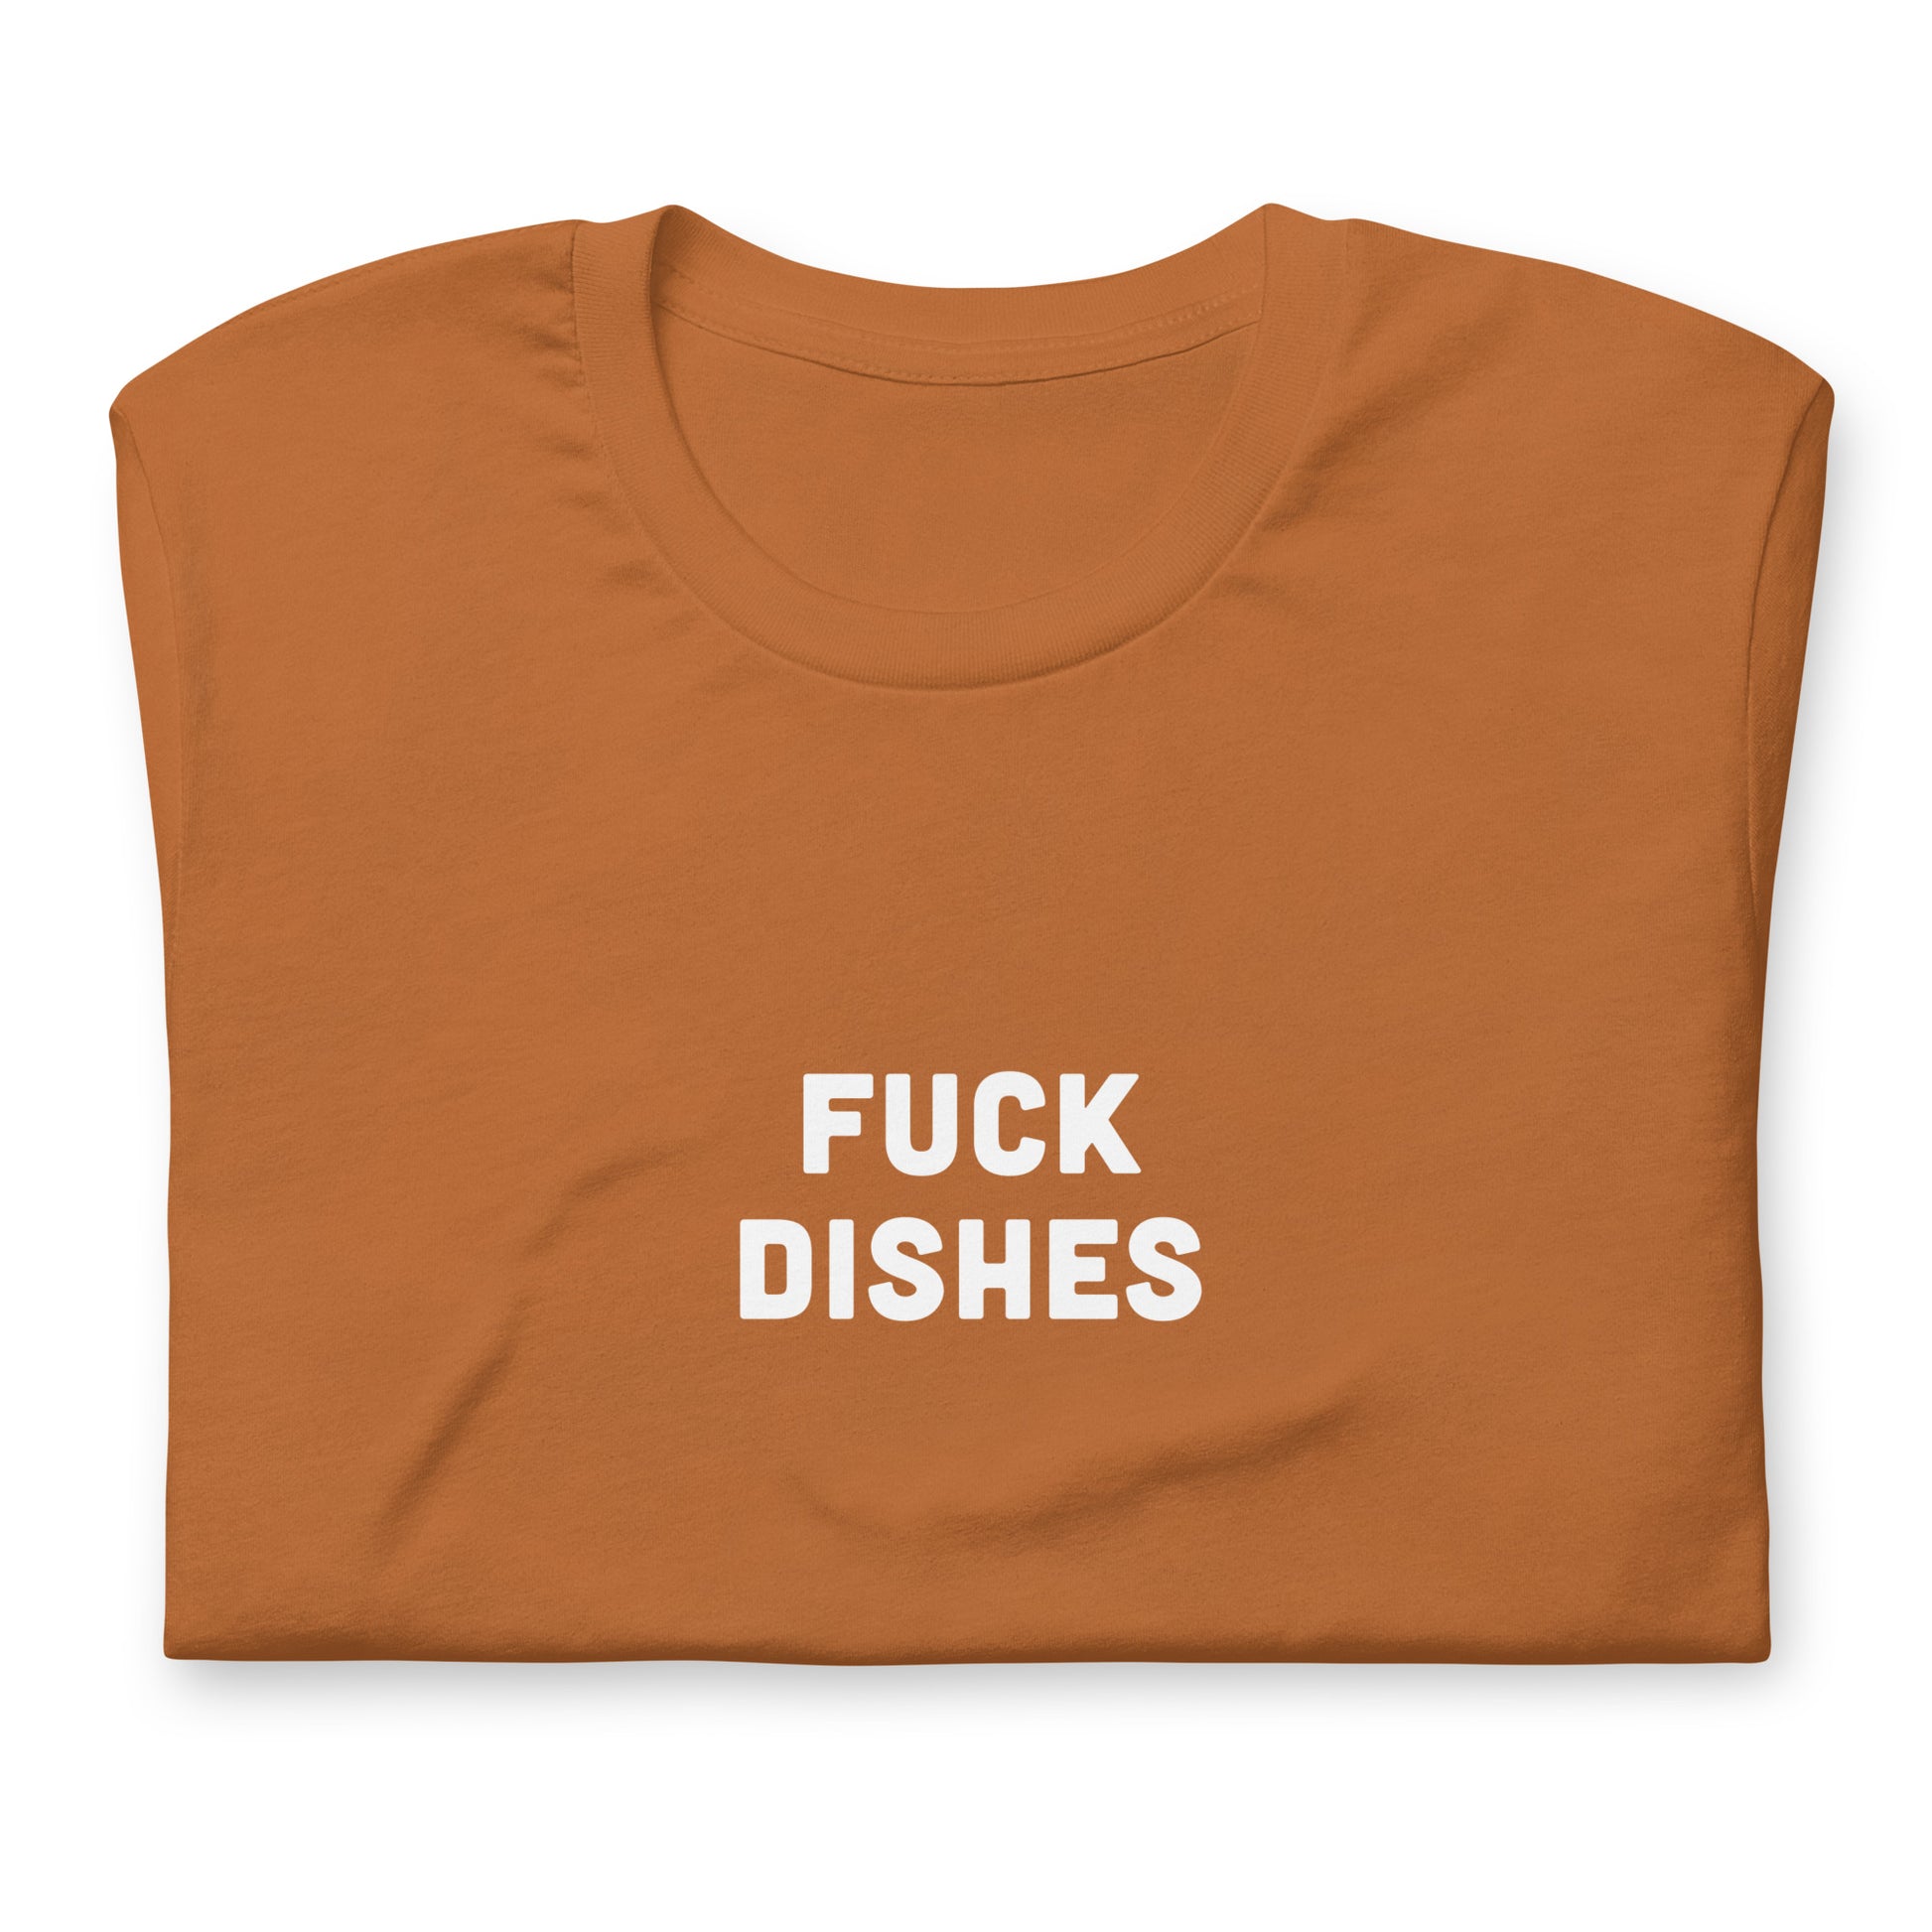 Fuck Dishes T-Shirt Size XL Color Navy